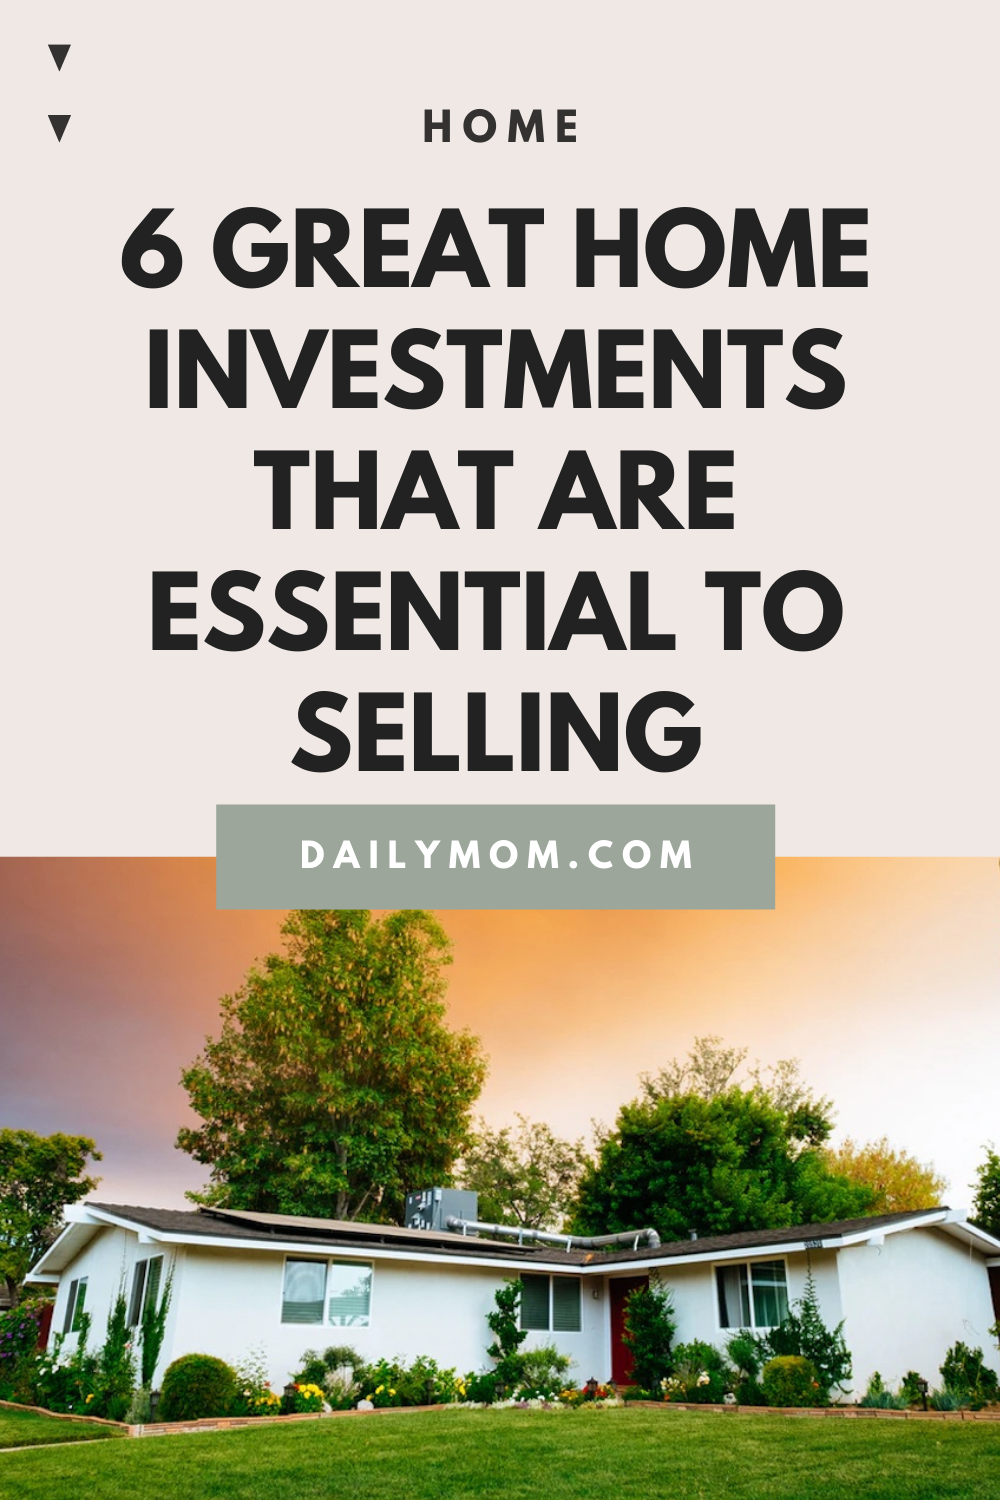 6 Great Home Investments That Are Essential To Selling